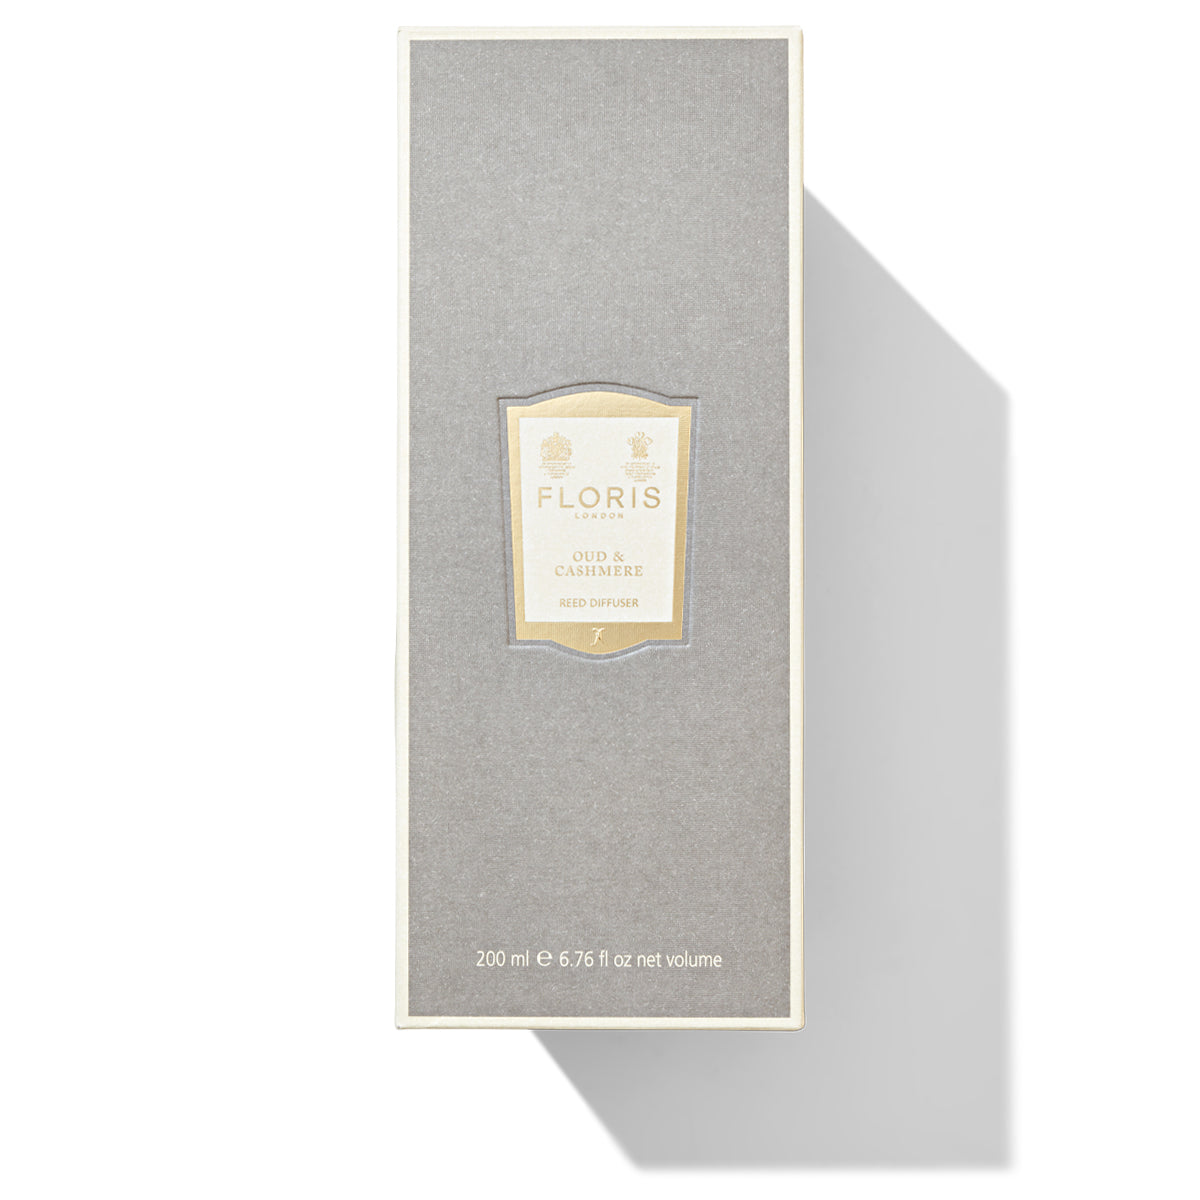 Oud Cashmere Reed Diffuser Box